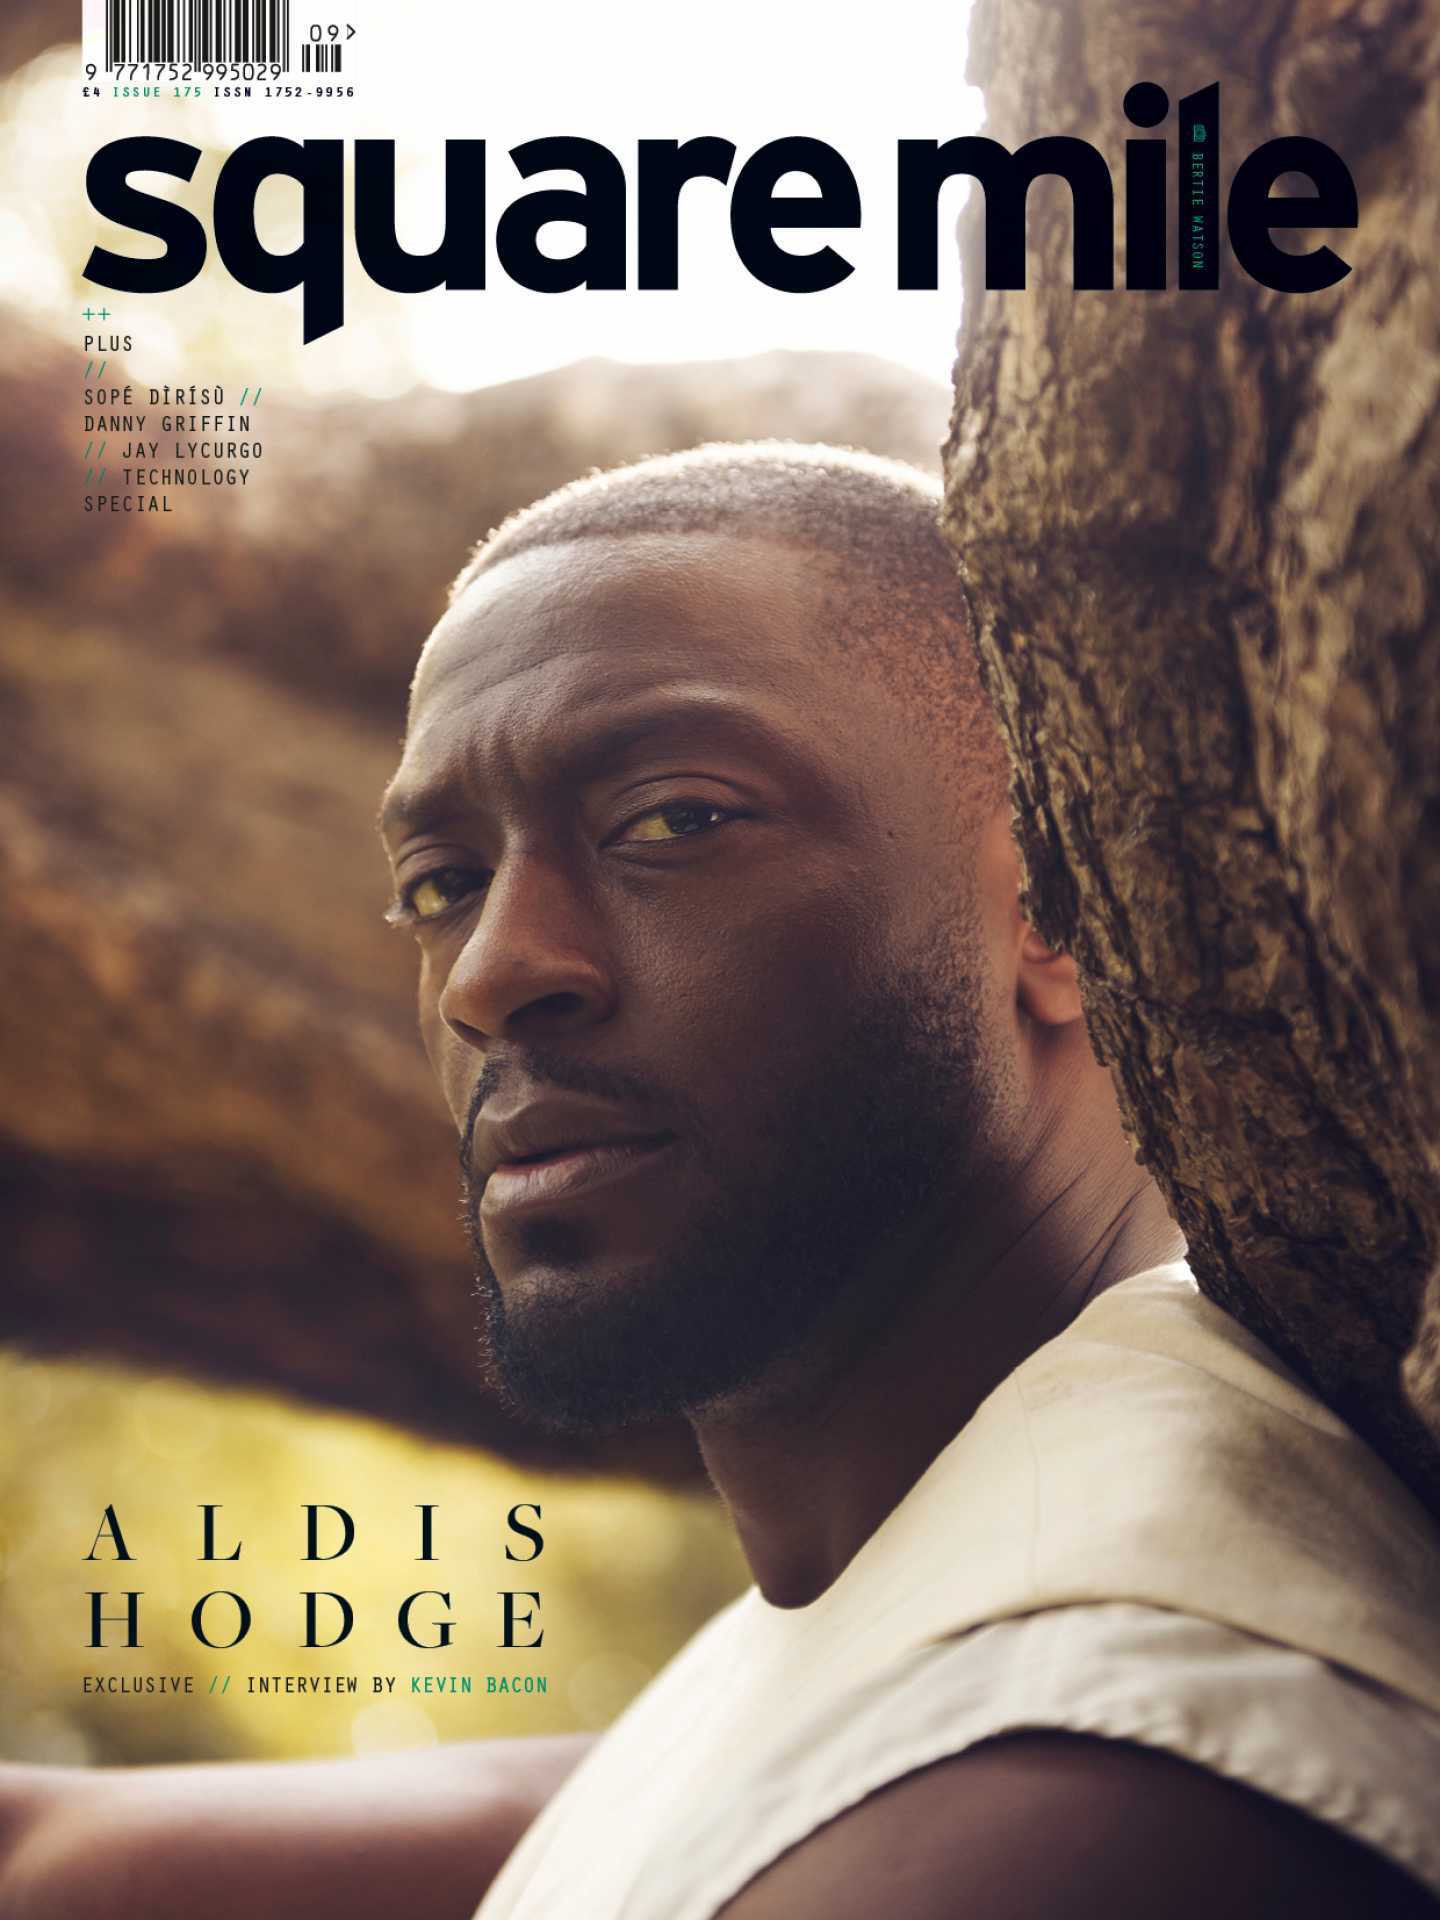 Aldis Hodge photographed for Square Mile by Bertie Watson